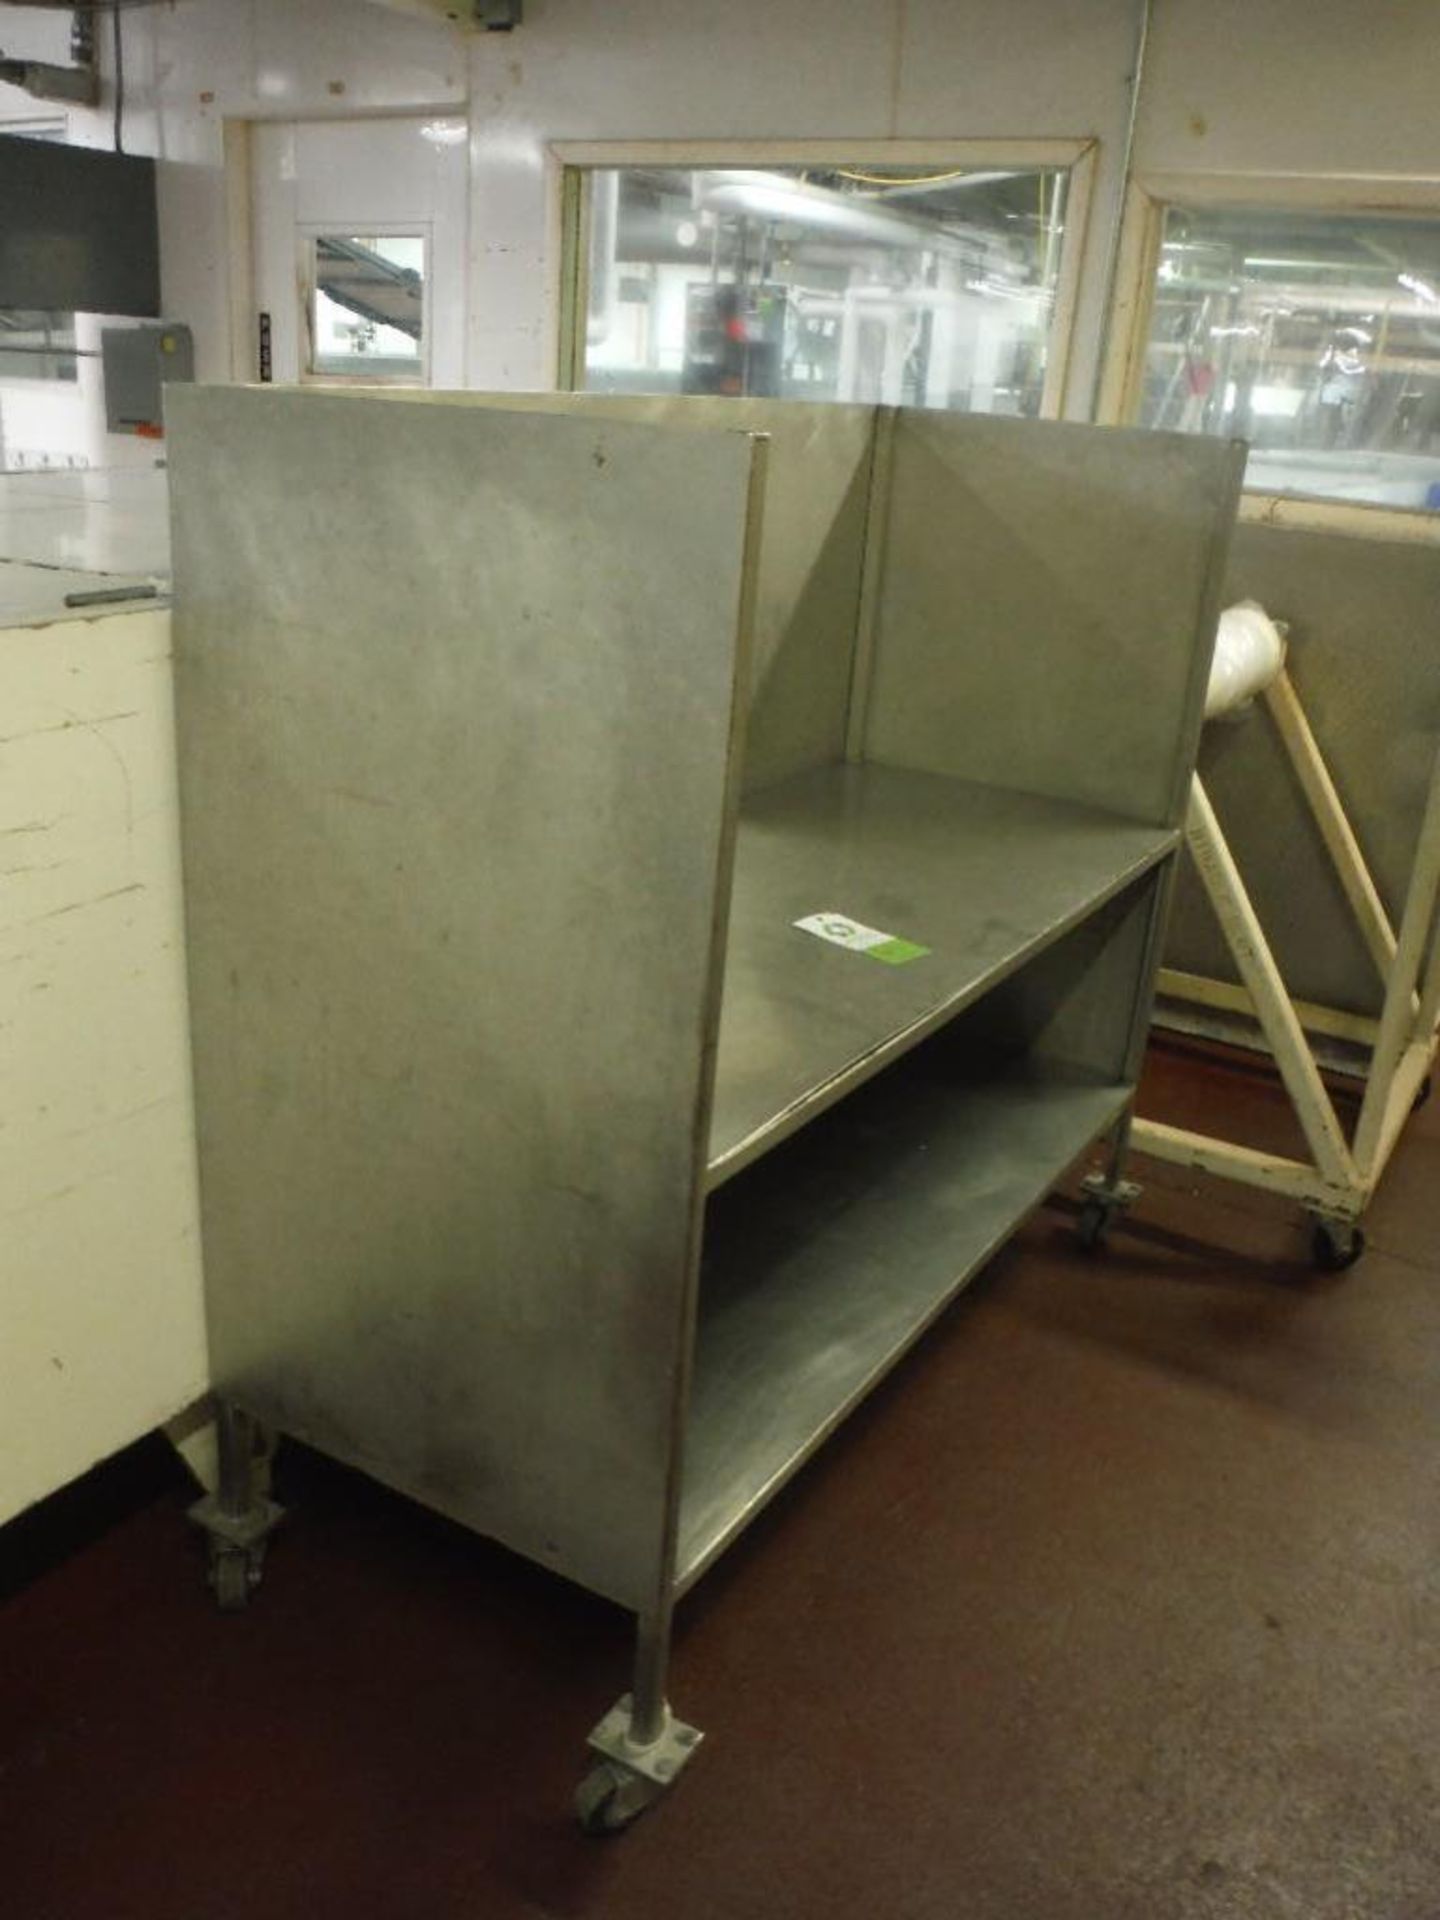 SS 2 level table with backsplash, 60 in. long x 24 in. wide x 30 in. tall, on casters - Rigging Fee: - Image 2 of 2